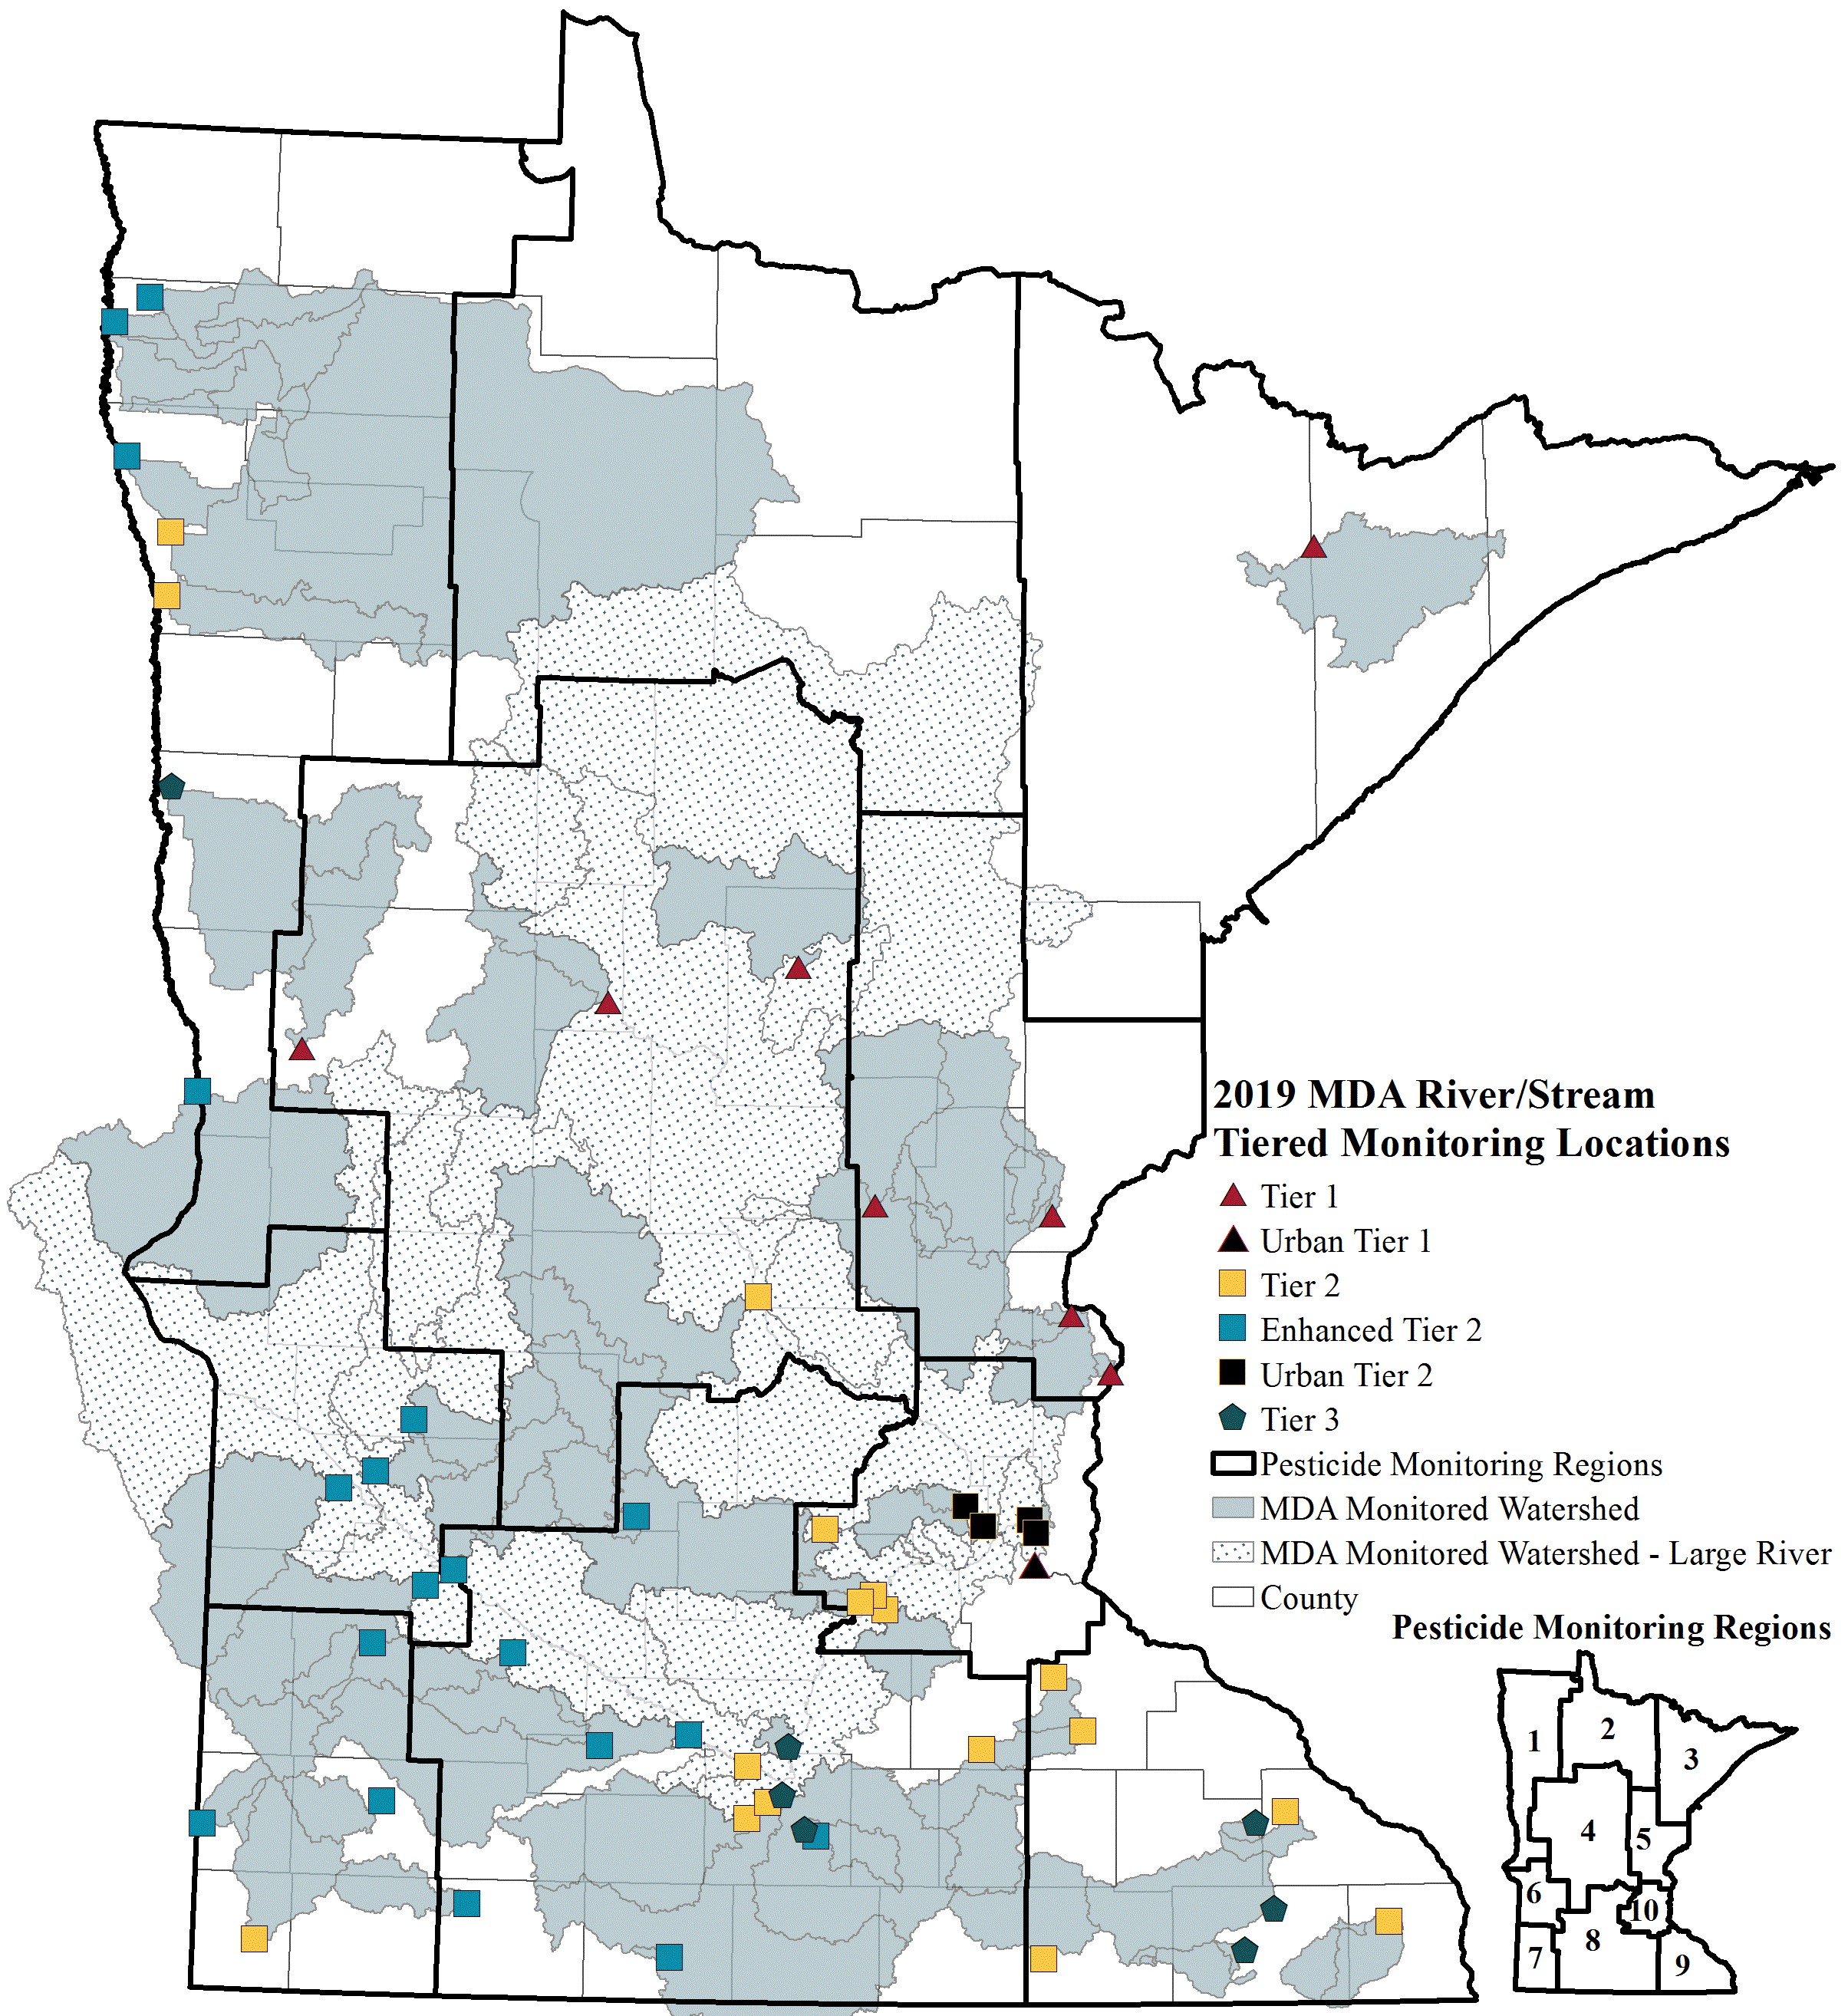 State of Minnesota map showing the surface water monitoring locations for 2019.